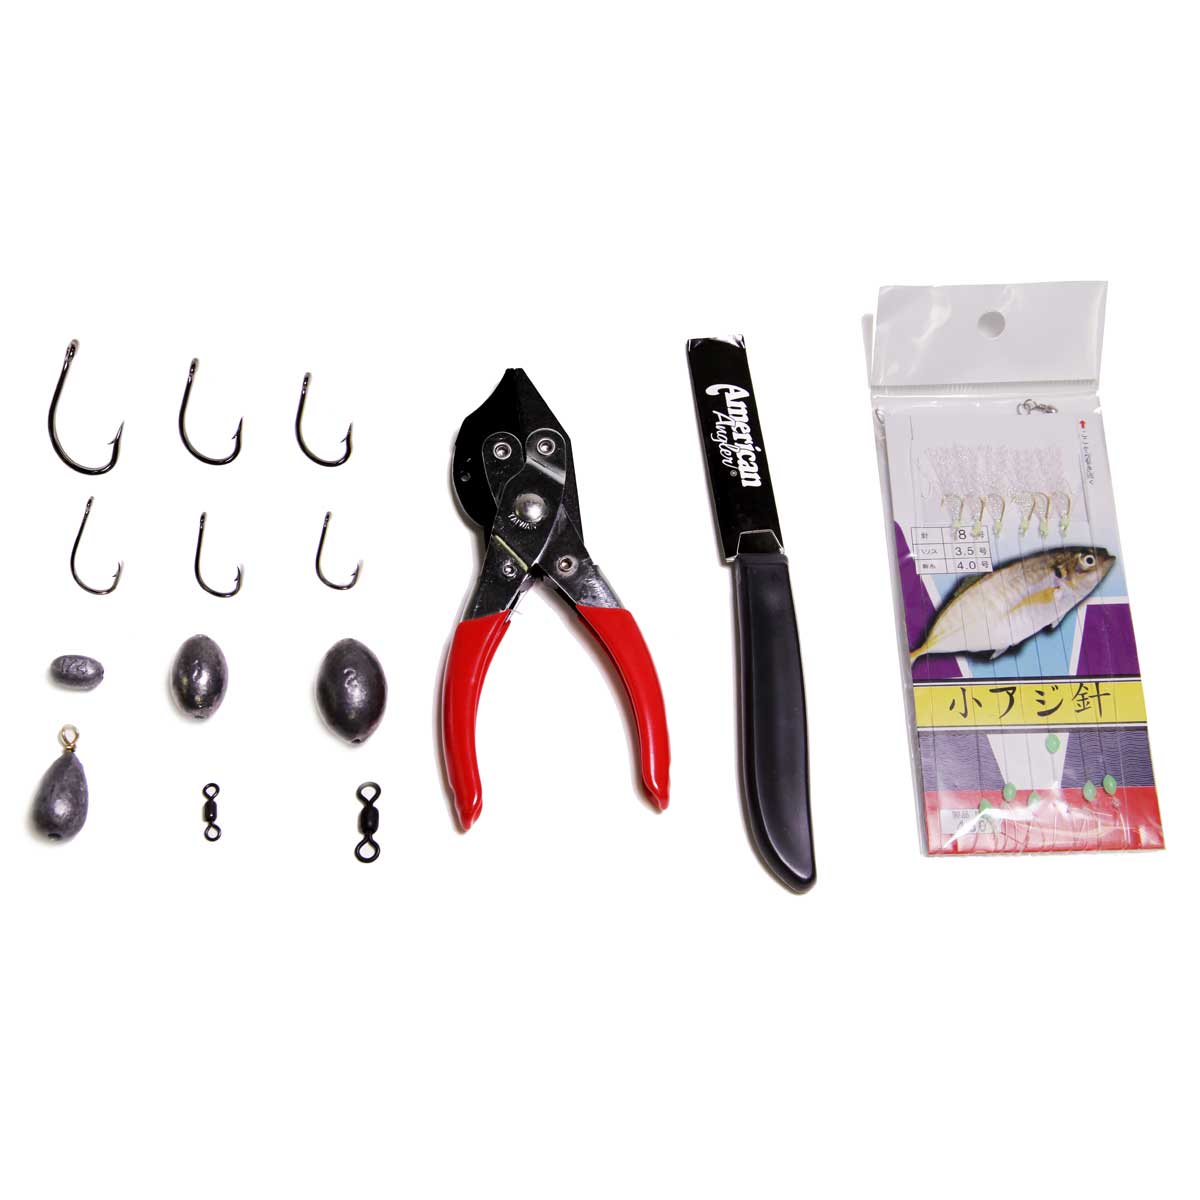 Tackle Kit Contents